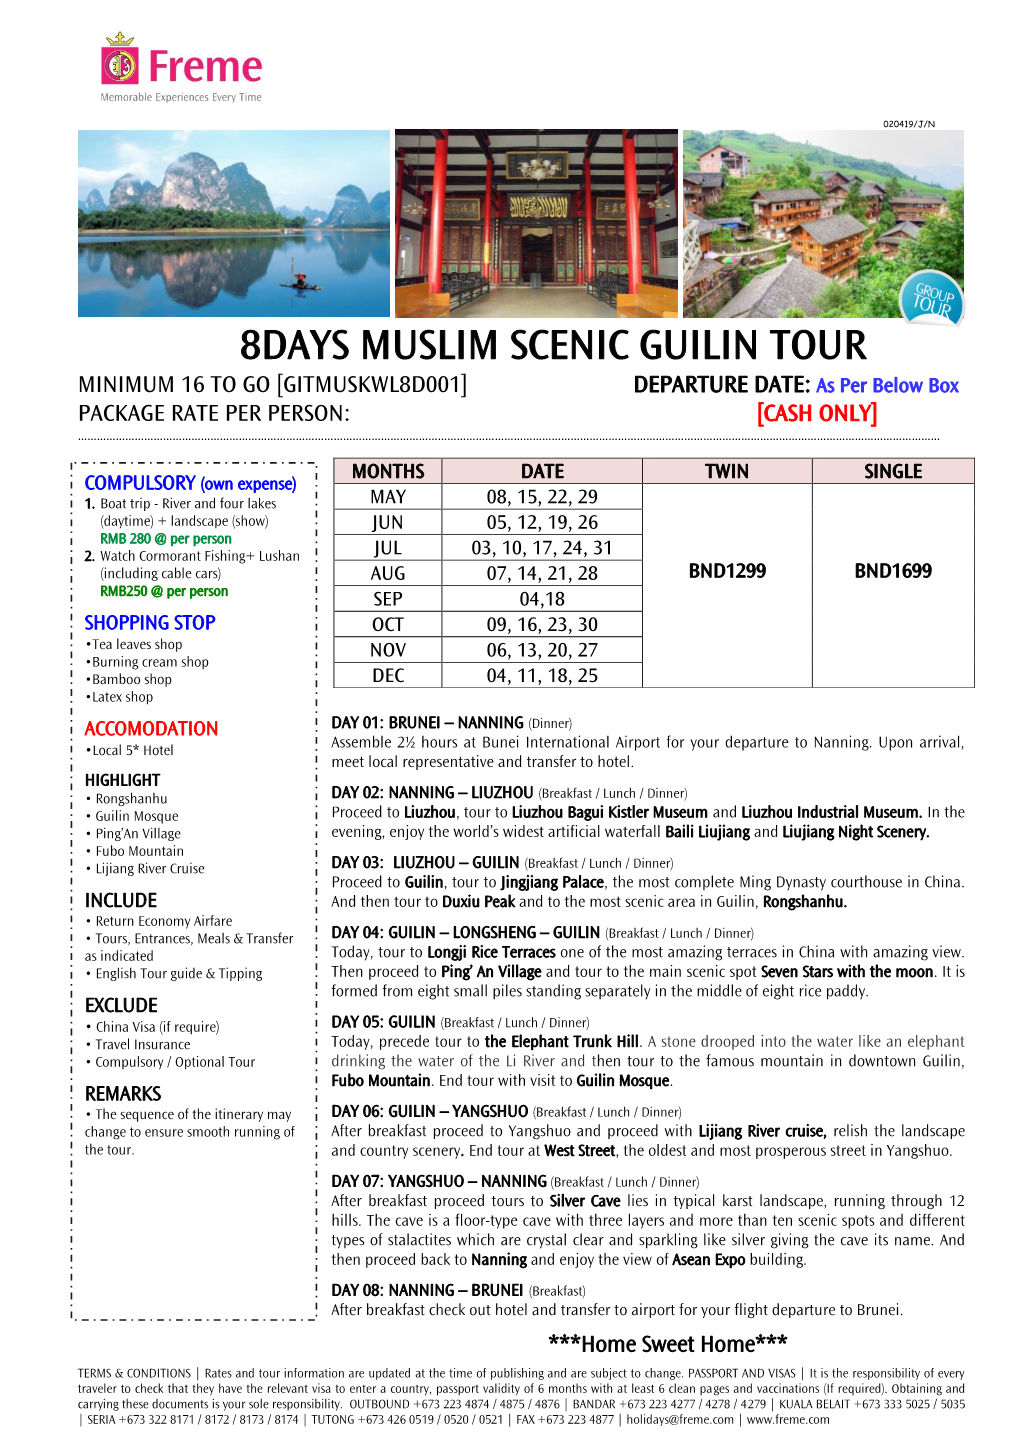 8Days Muslim Scenic Guilin Tour